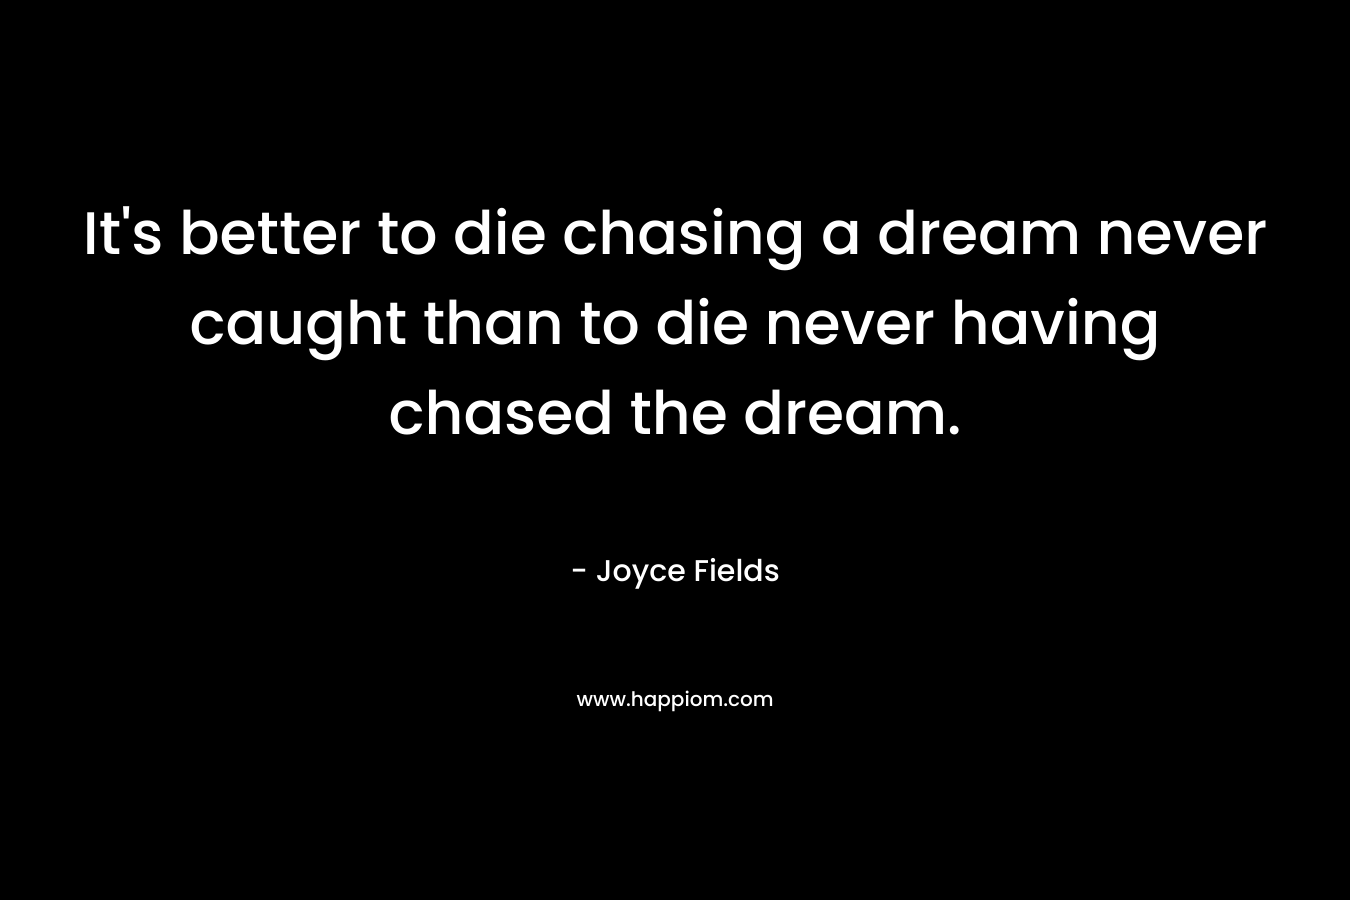 It's better to die chasing a dream never caught than to die never having chased the dream.